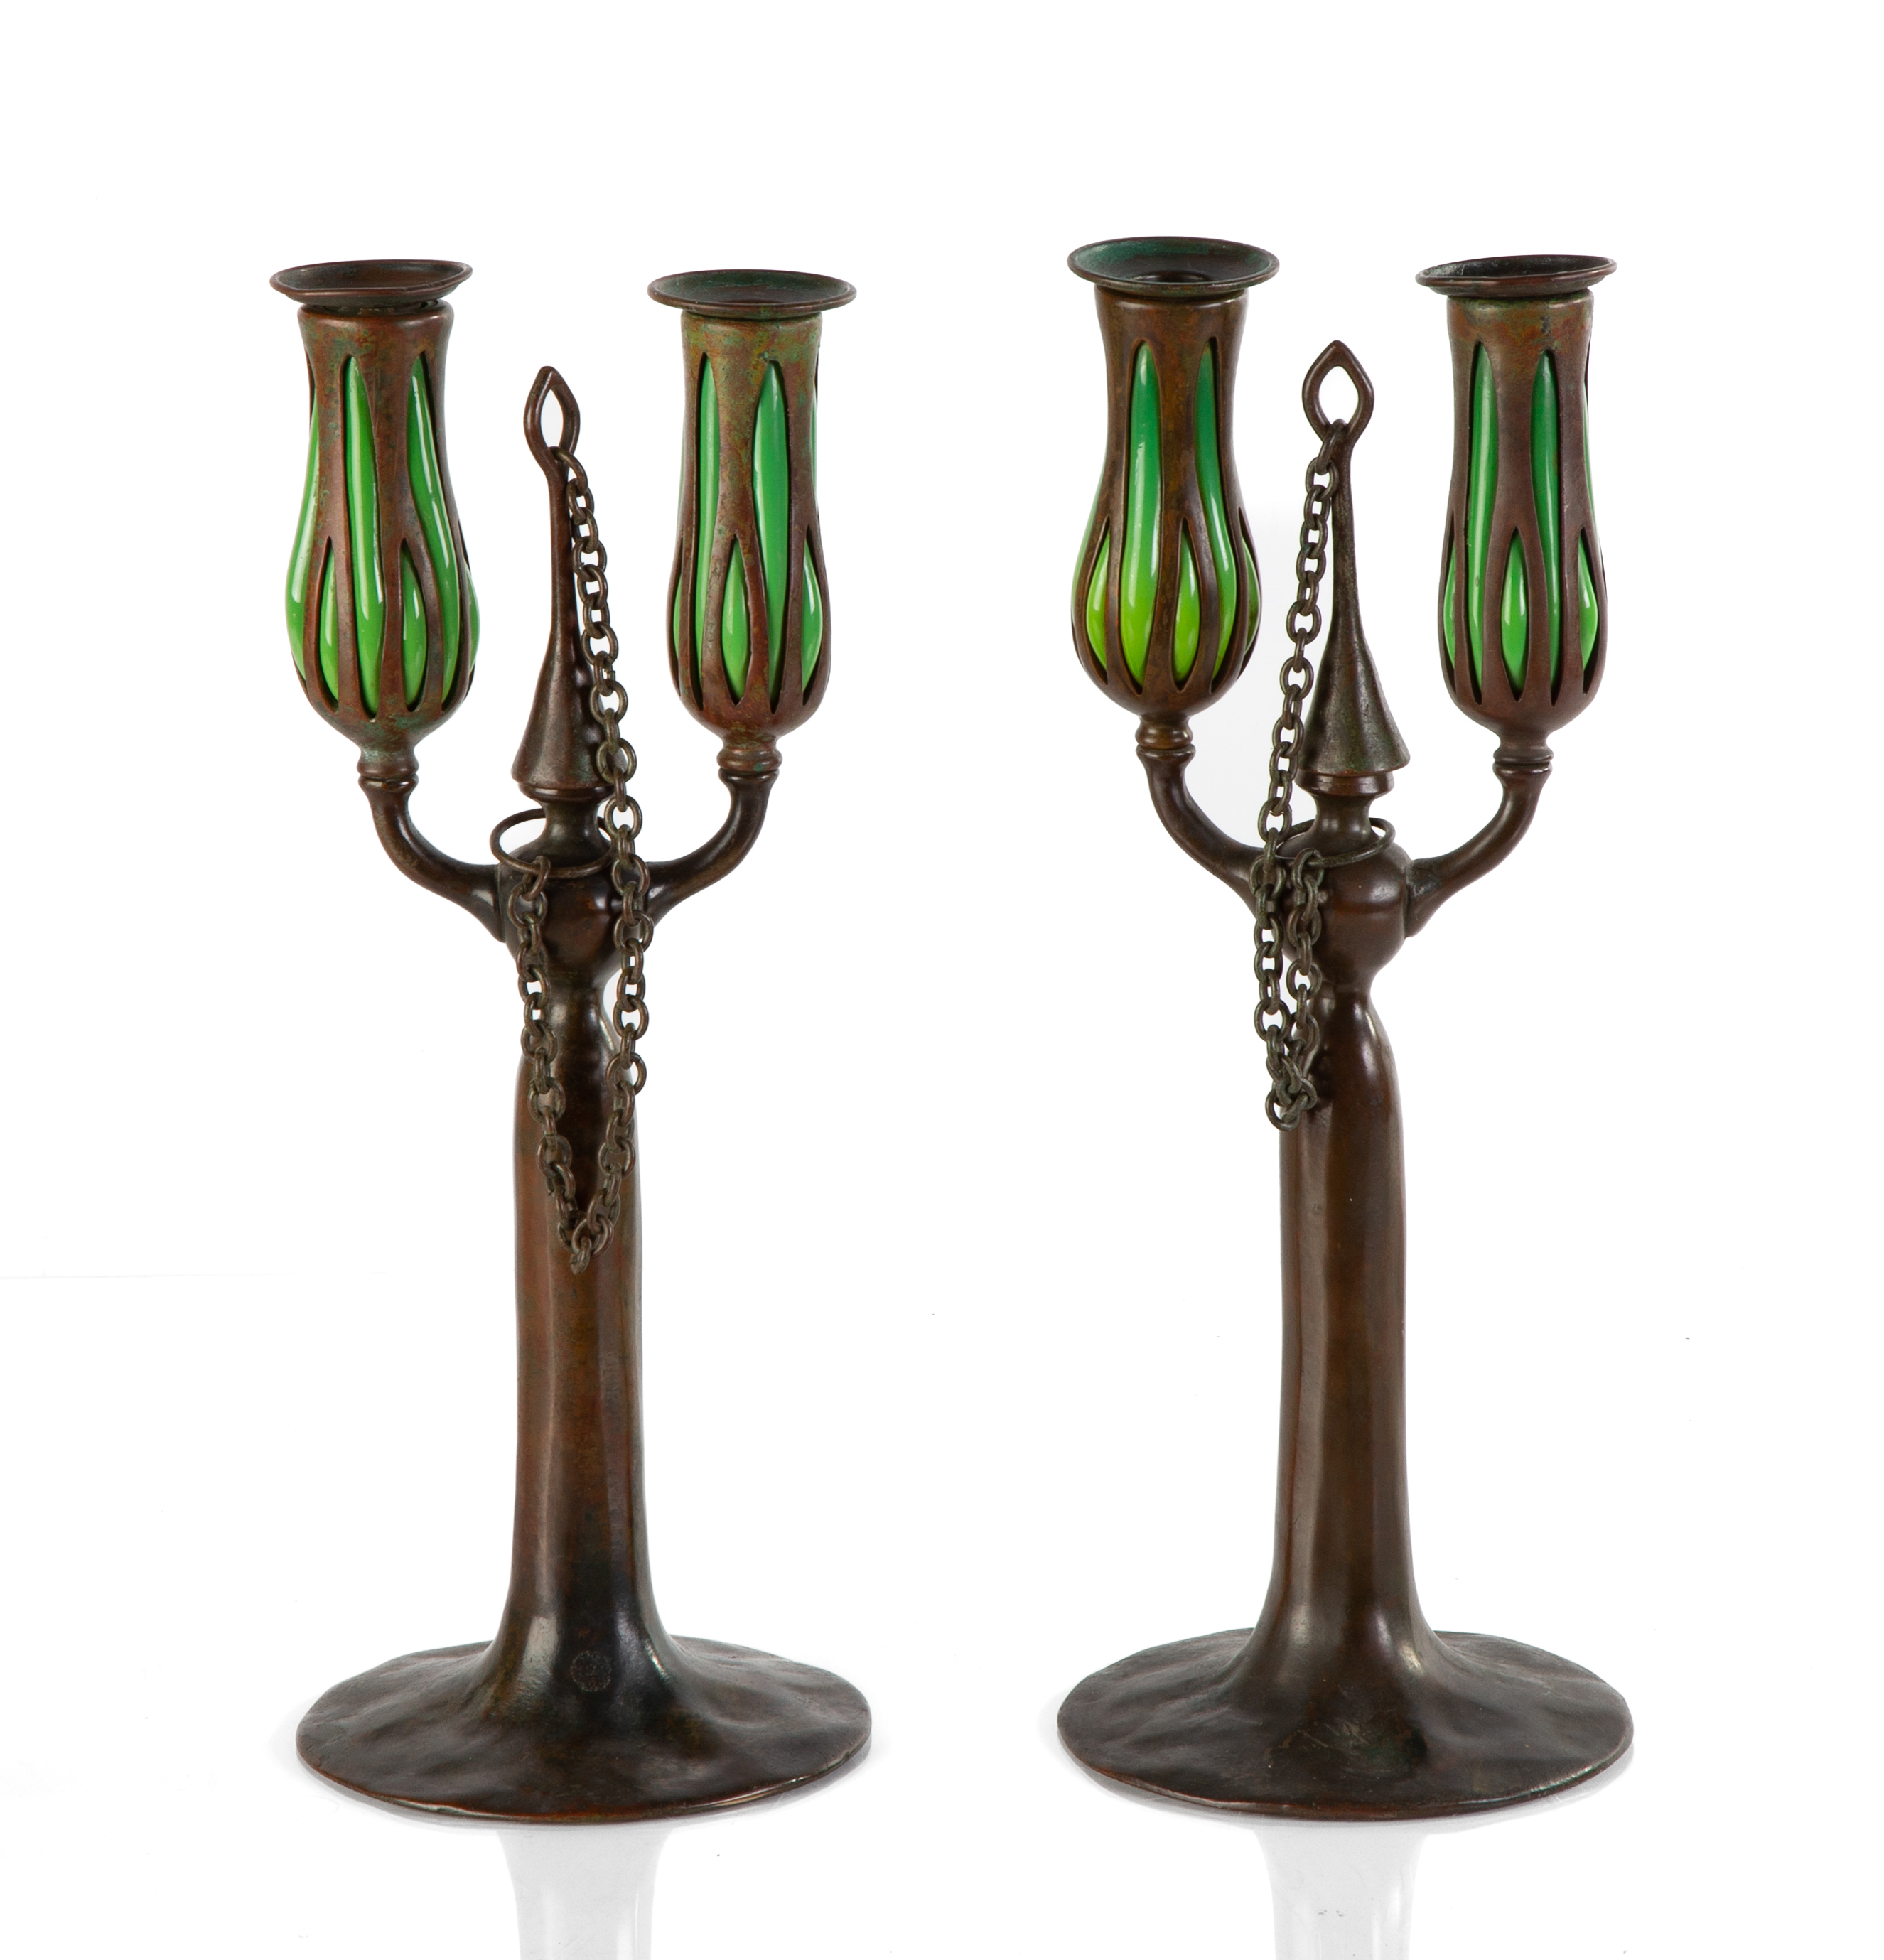 TIFFANY STUDIOS, PAIR OF BLOWN-OUT